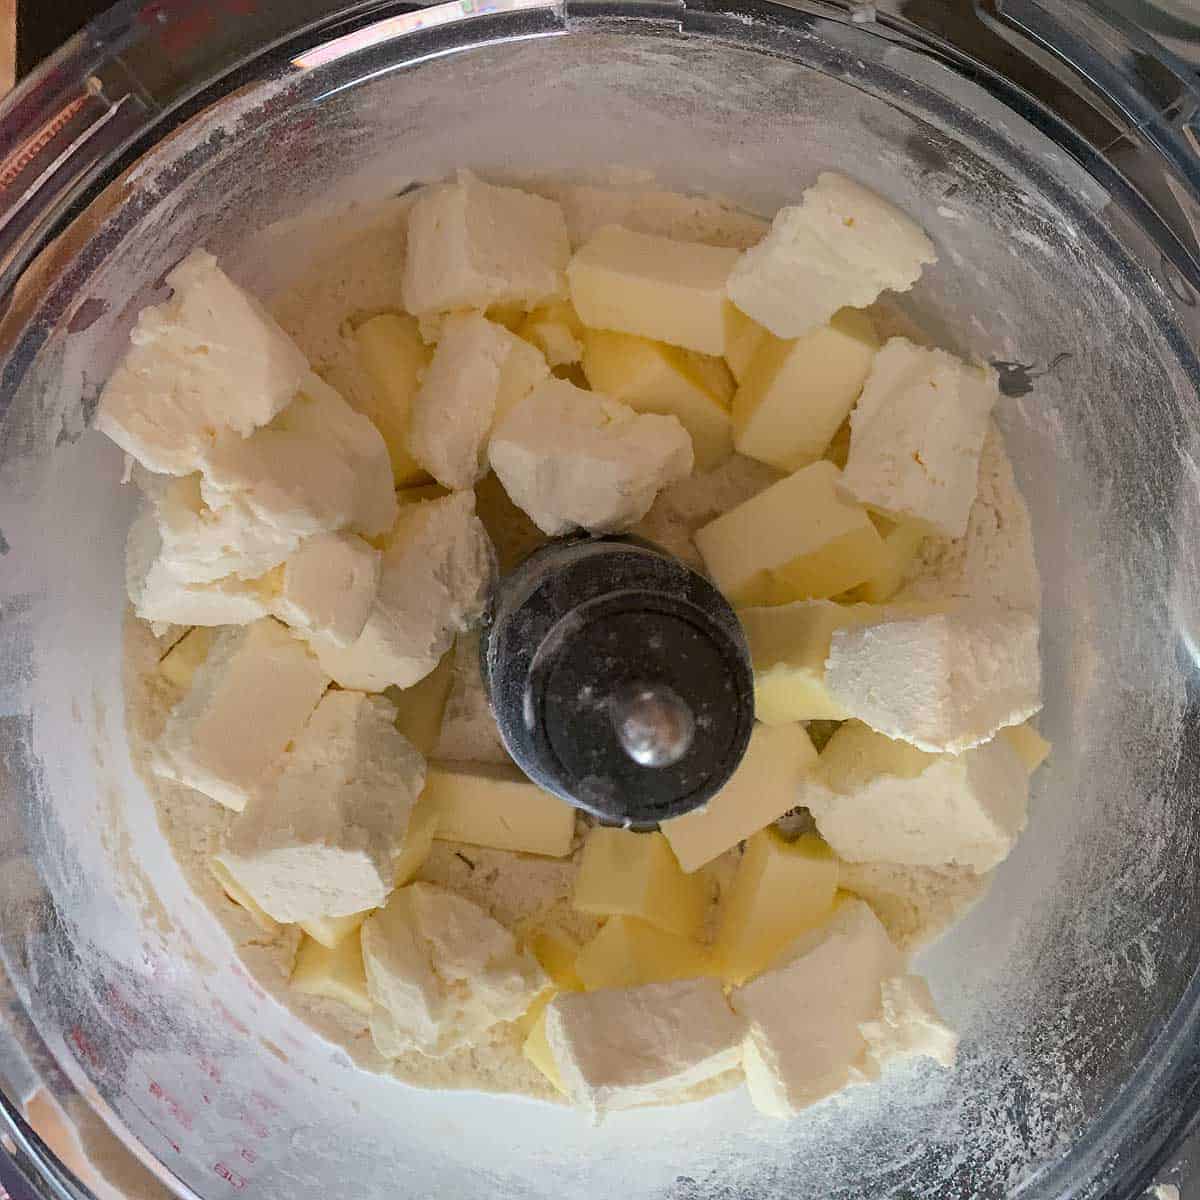 Cut up pieces of cream cheese, butter, and flour mixture in a food processor ready to mix.